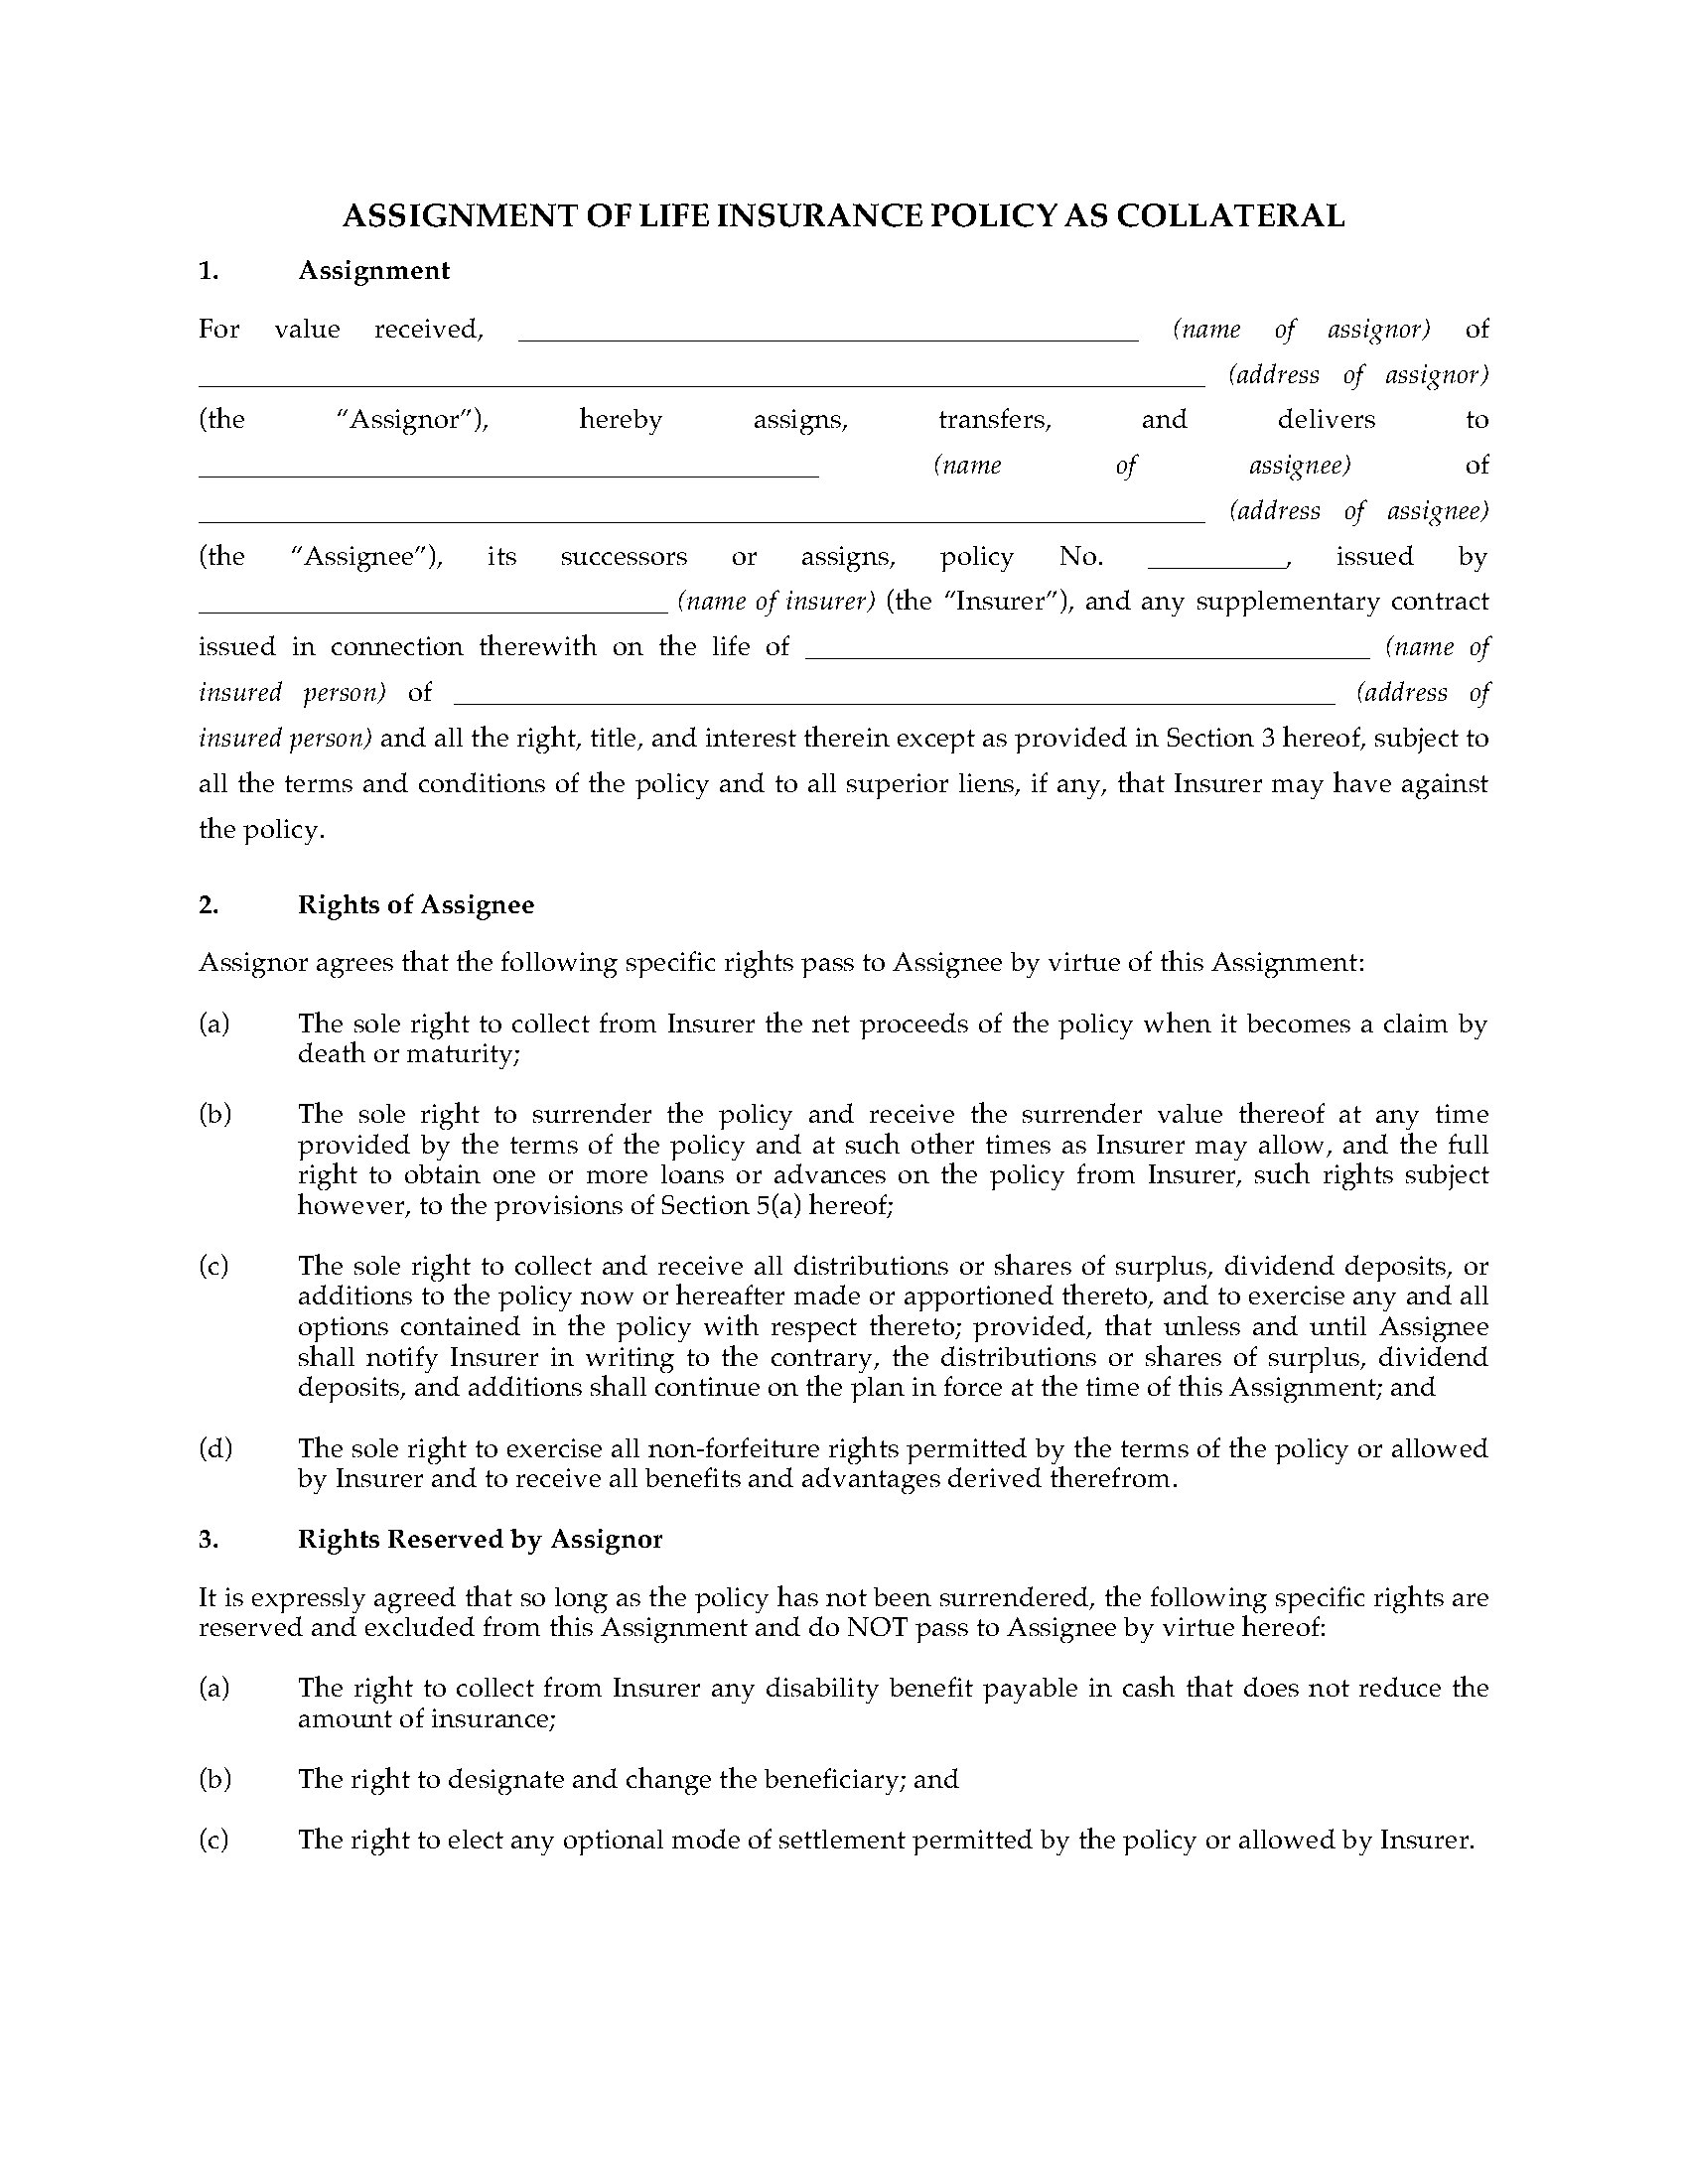 assignment of life insurance policy as collateral form